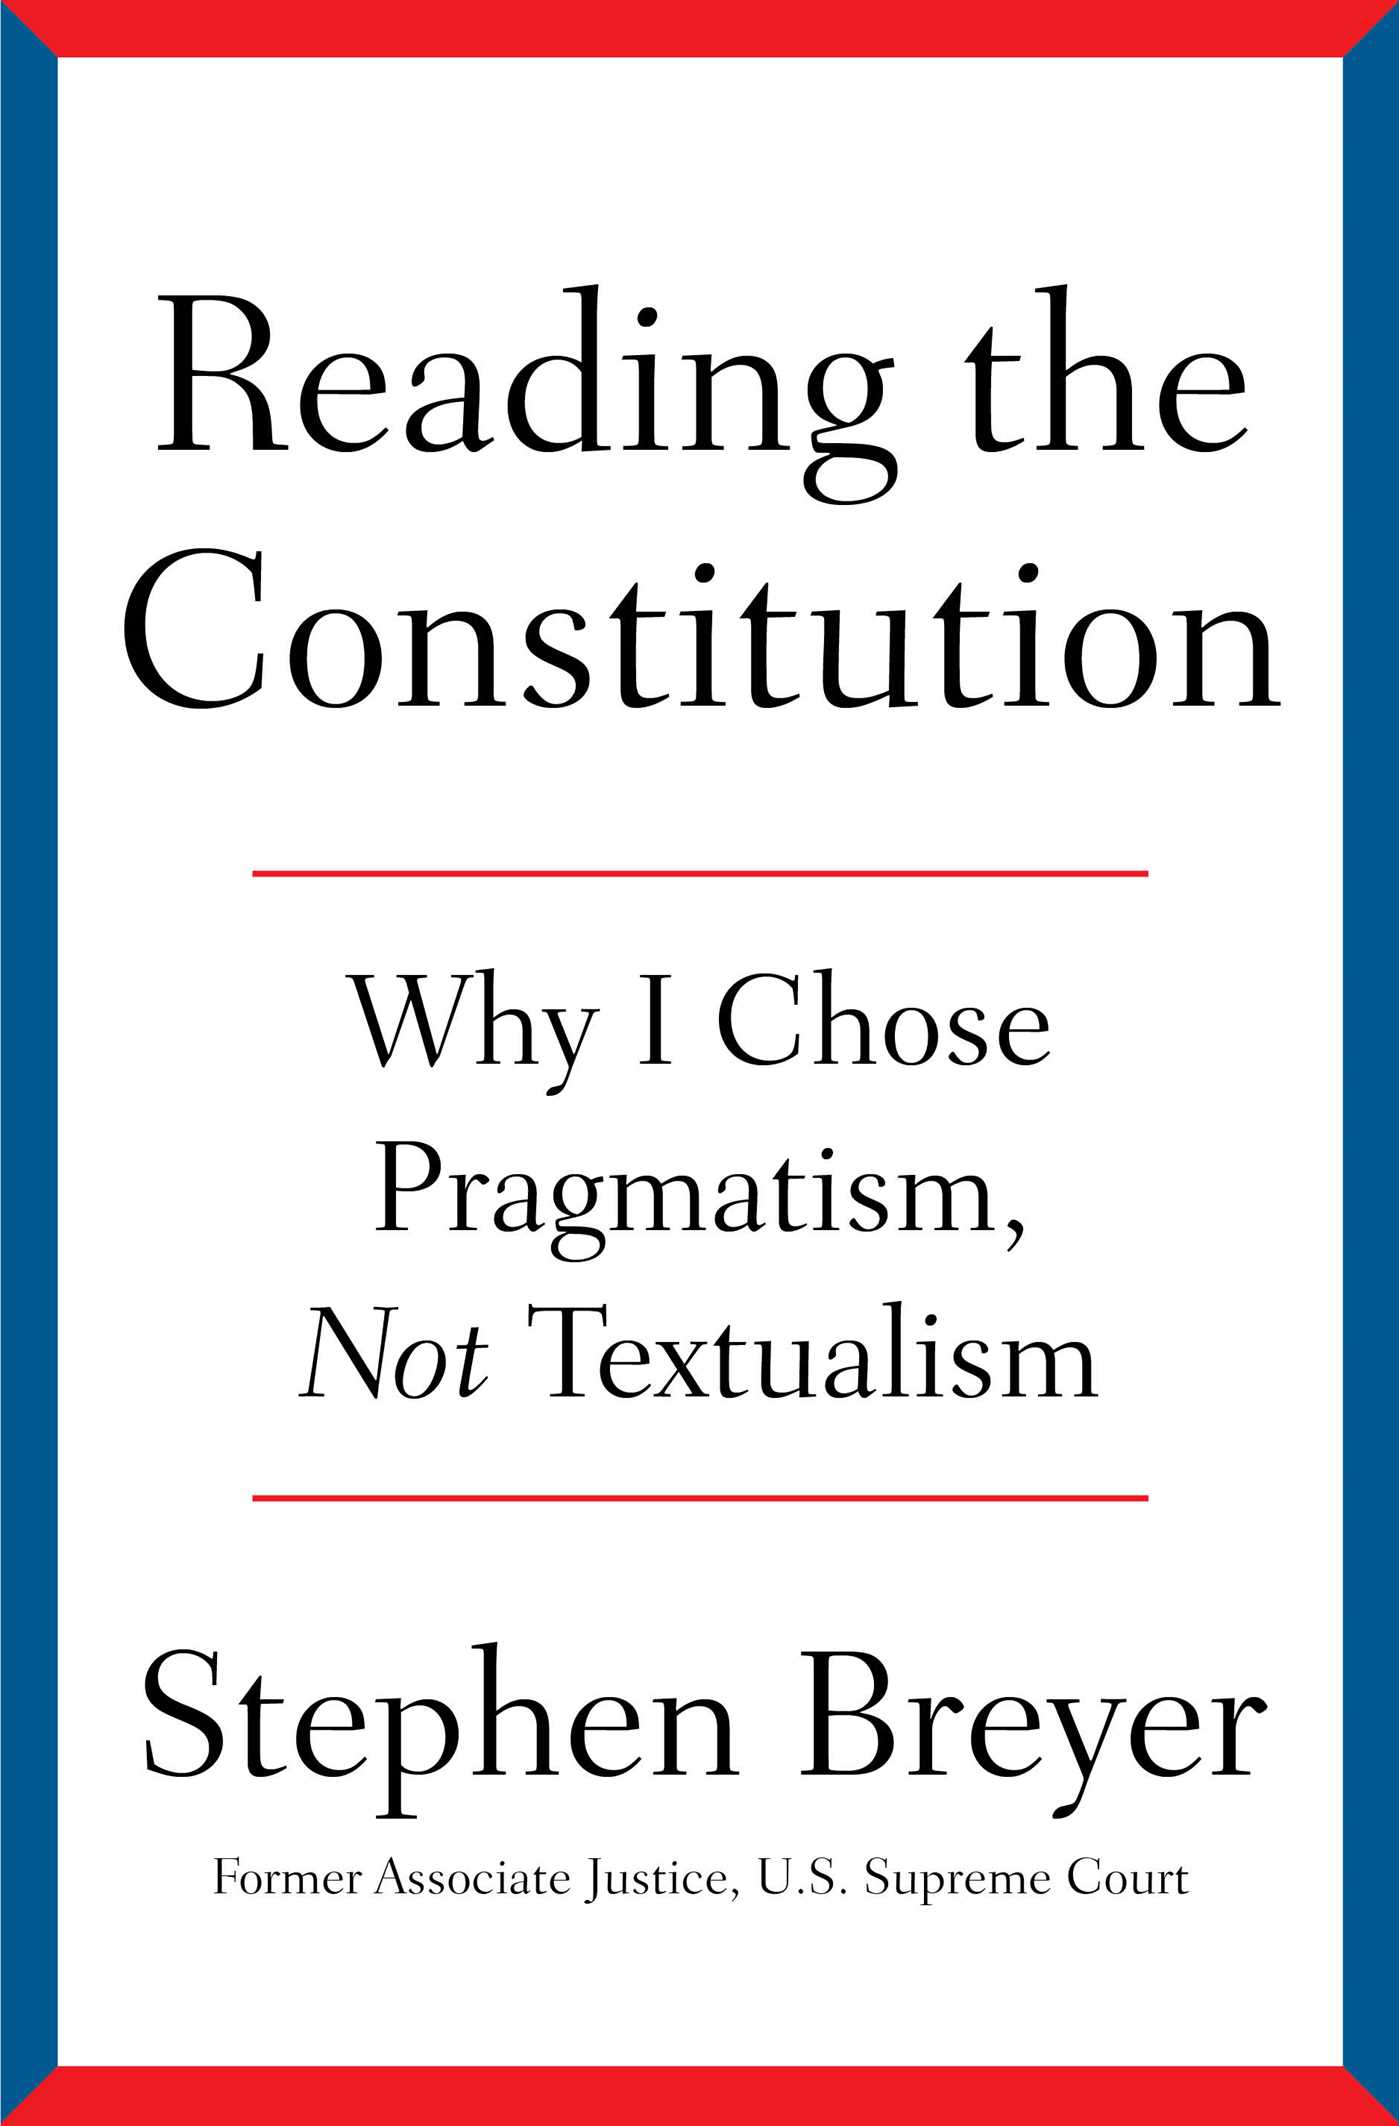 Image for "Reading the Constitution"